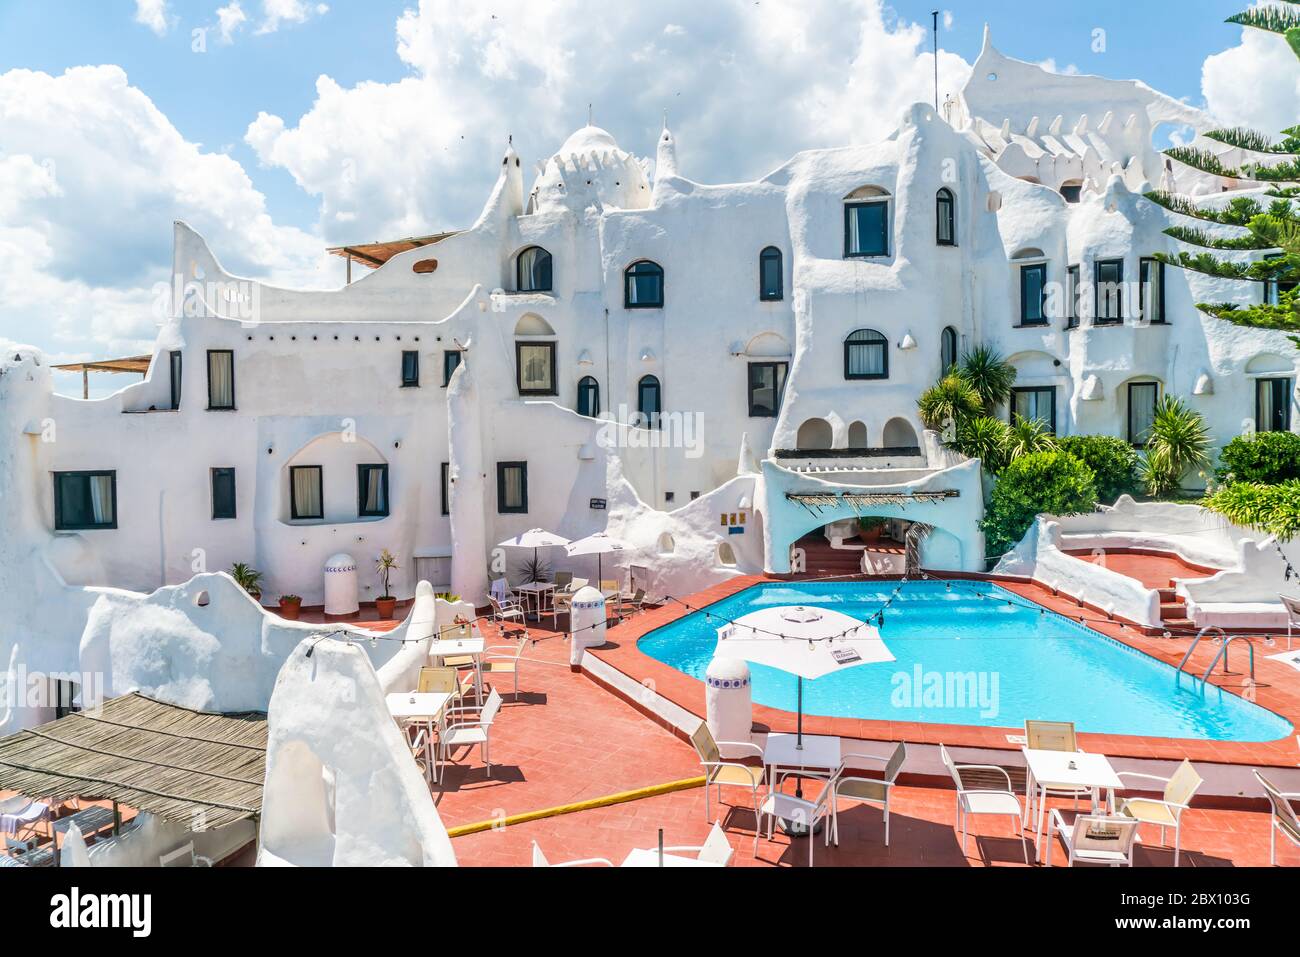 Pool and terrace of the famous Casapueblo, the Whitewashed cement and stucco buildings near the town of Punta Del Este, Uruguay, January 28th 2019 Stock Photo